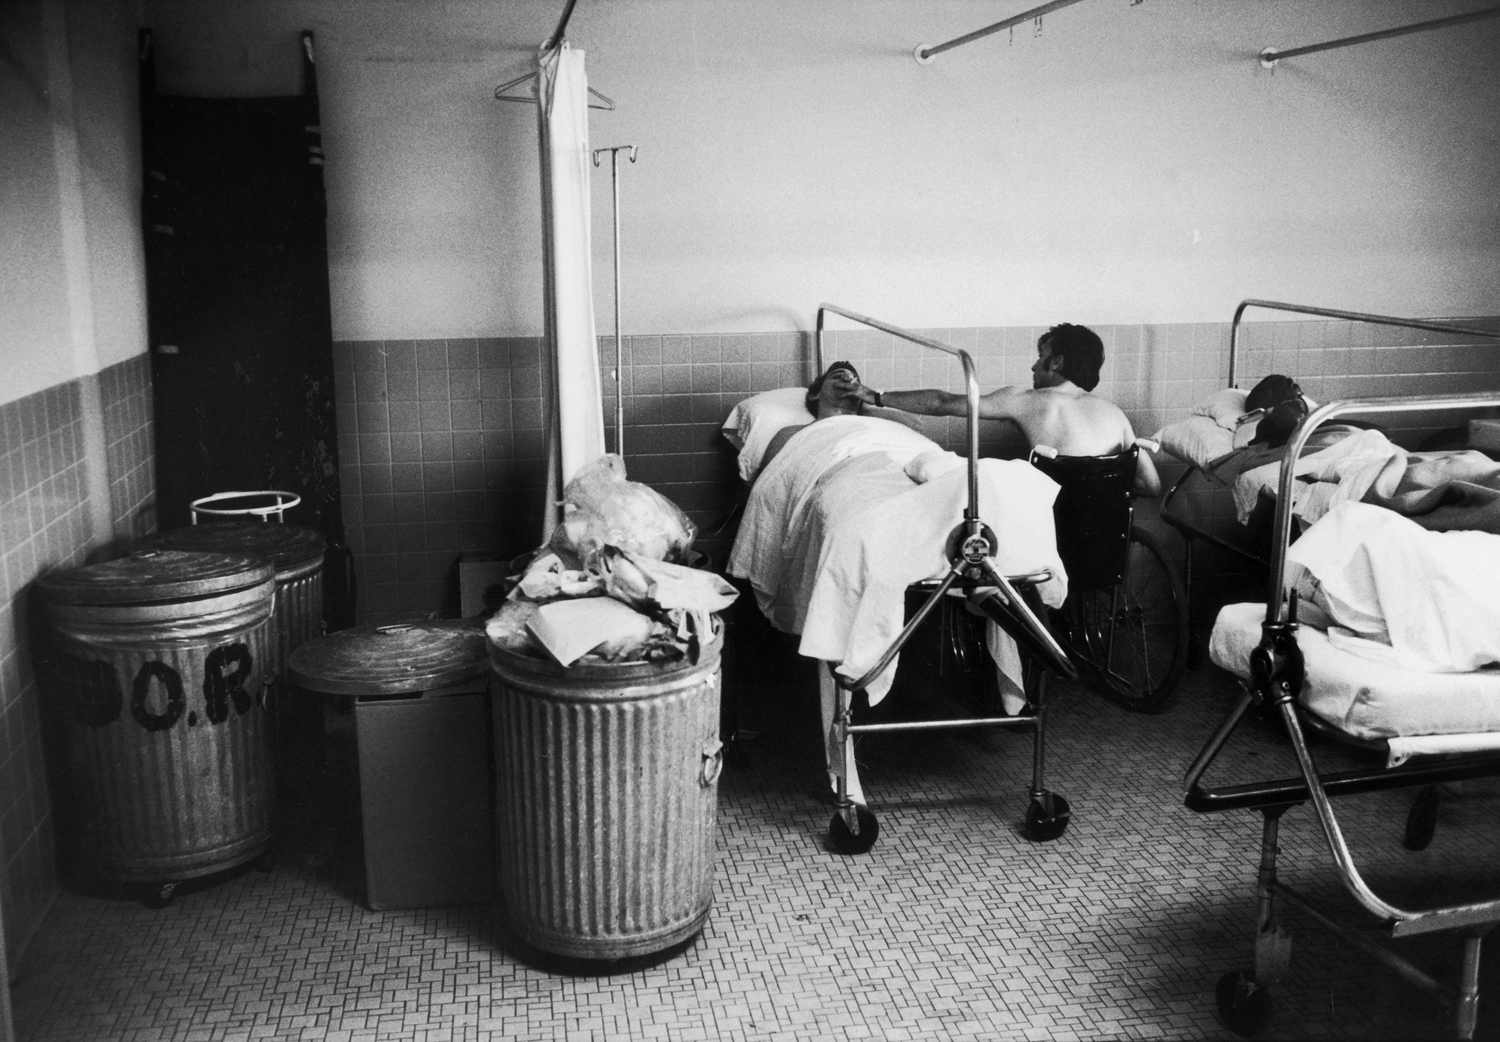 At the Bronx VA Hospital veteran Frank Stoppiello, wounded in the Ashau Valley in Vietnam, gives a cigarette to quadriplegic Andrew Kmetz, an Army veteran, as they wait for treatment. Because of overcrowding, they must share a corner with trash cans.